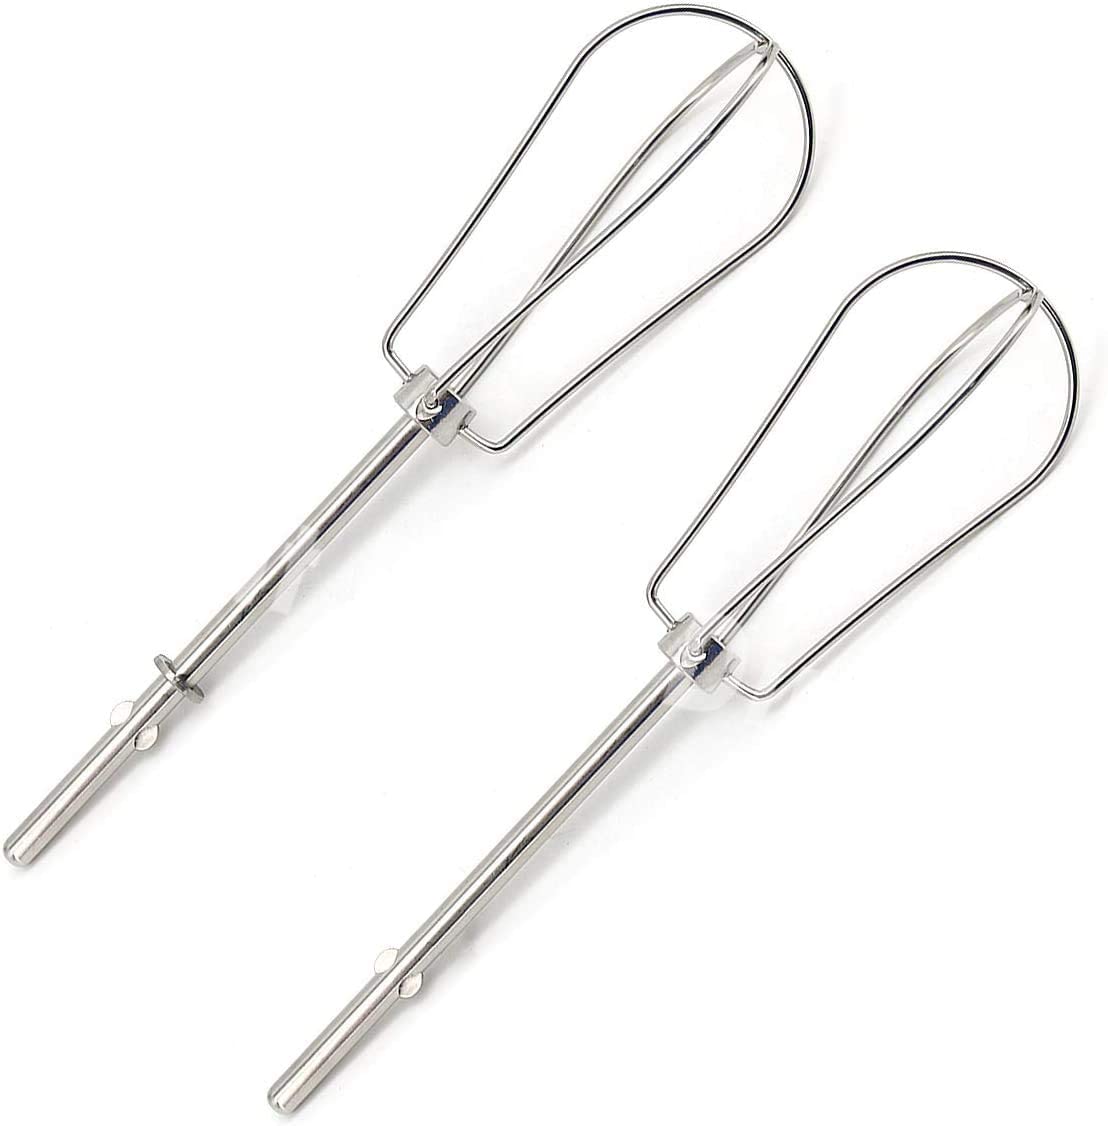 https://www.dontwasteyourmoney.com/wp-content/uploads/2022/12/discount-parts-direct-stainless-hand-mixer-replacement-beaters-2-count-hand-mixer-replacement-beaters.jpg